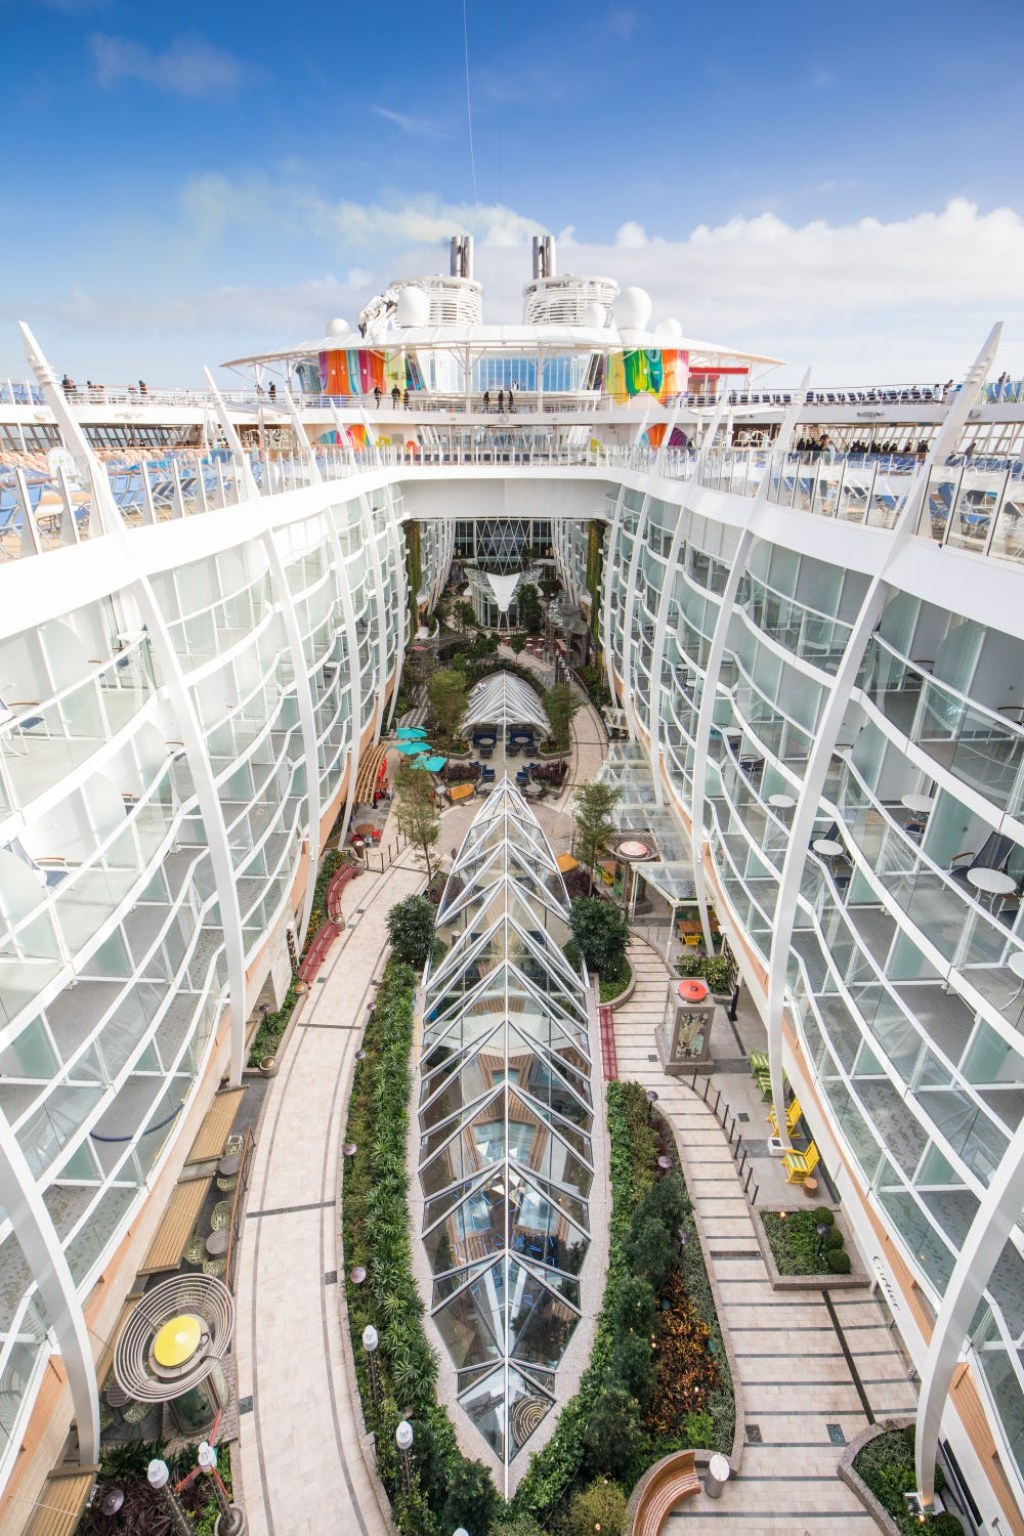 central park cruise ship - What the Symphony of the Seas